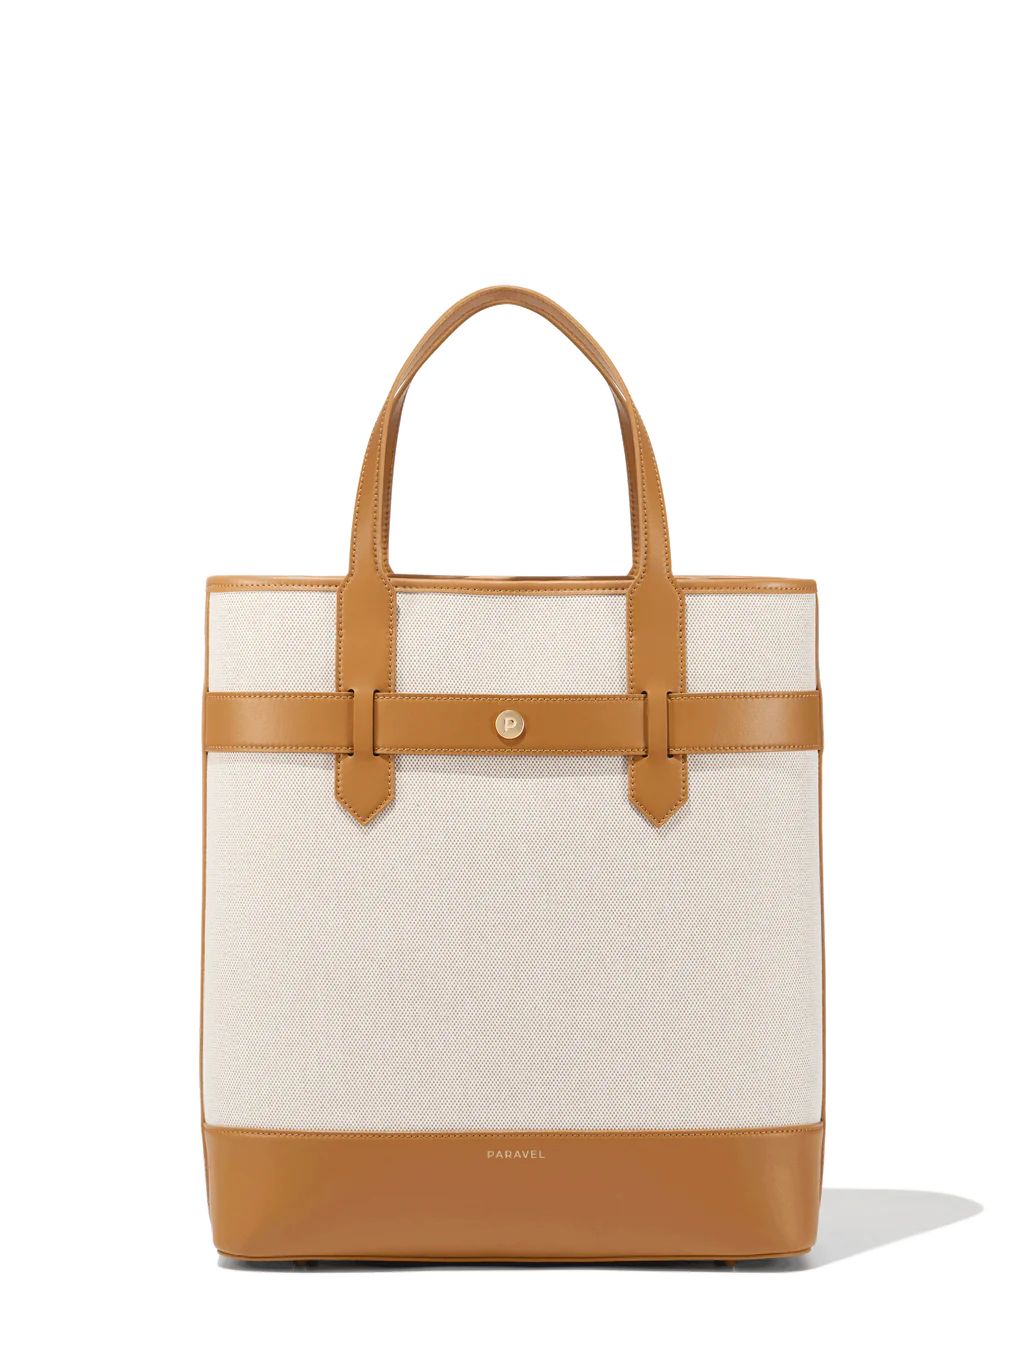 Pacific Tote | Paravel